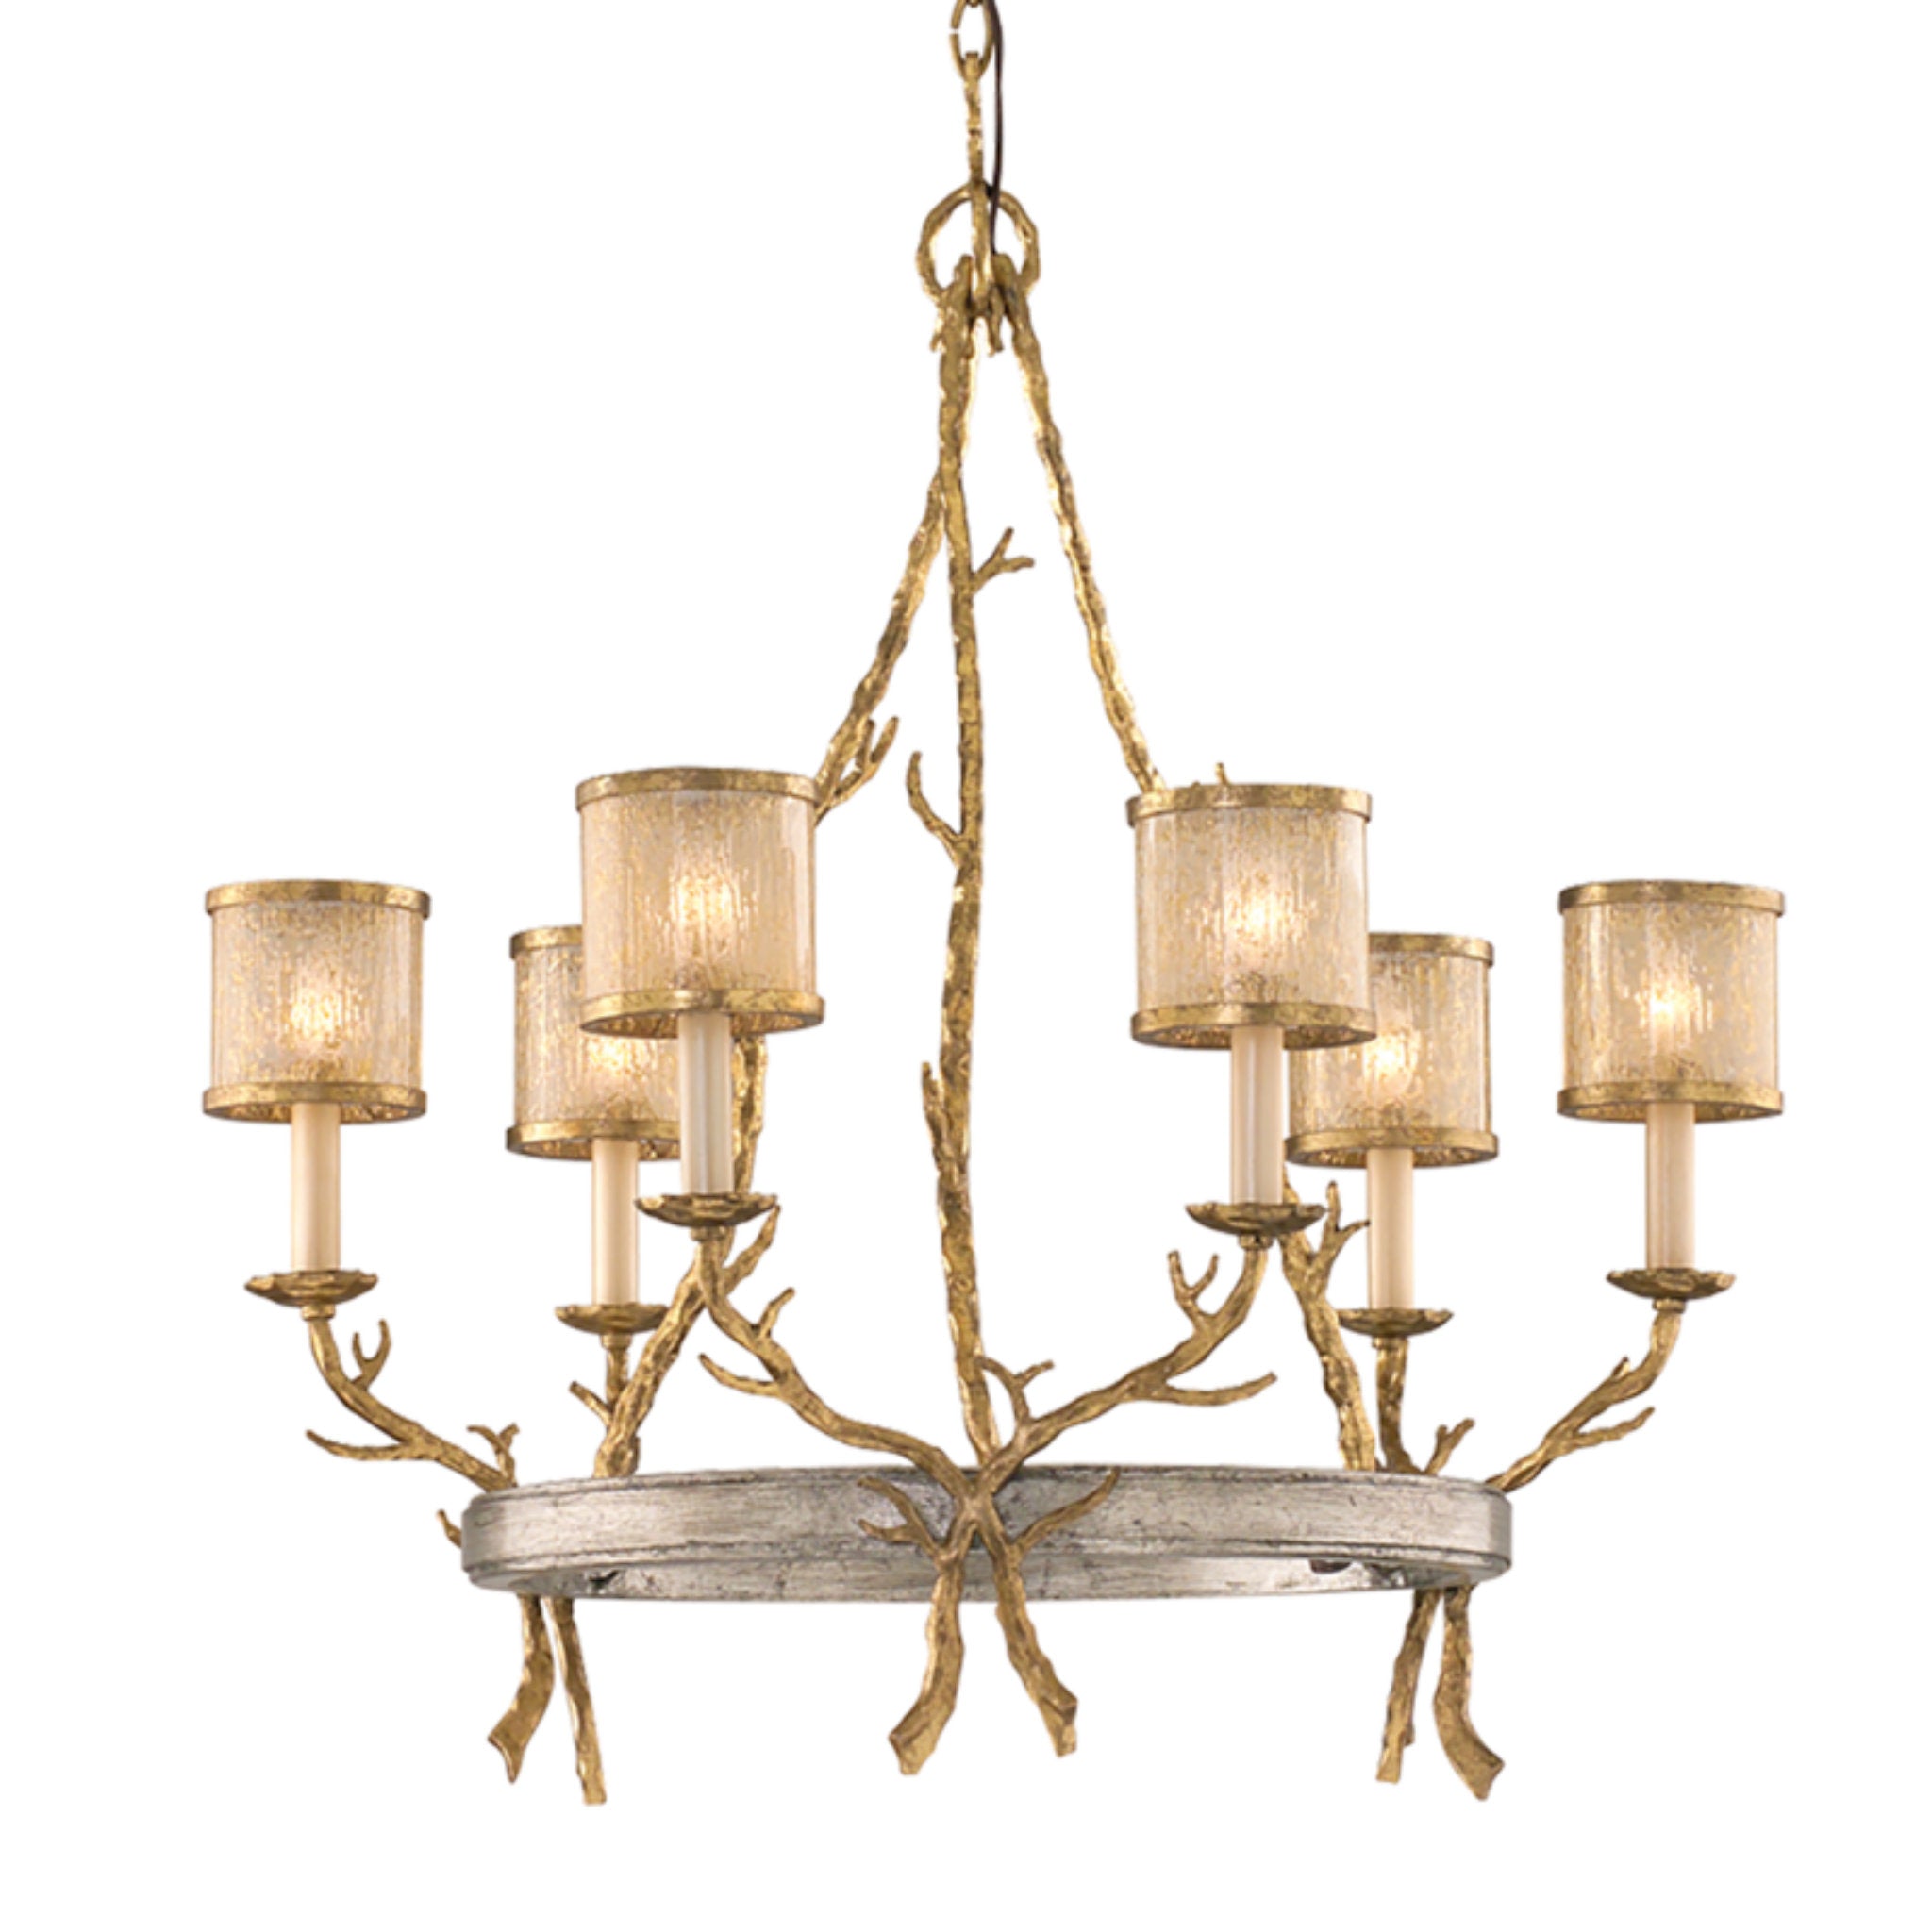 Parc Royale 6 Light Chandelier in Gold And Silver Leaf